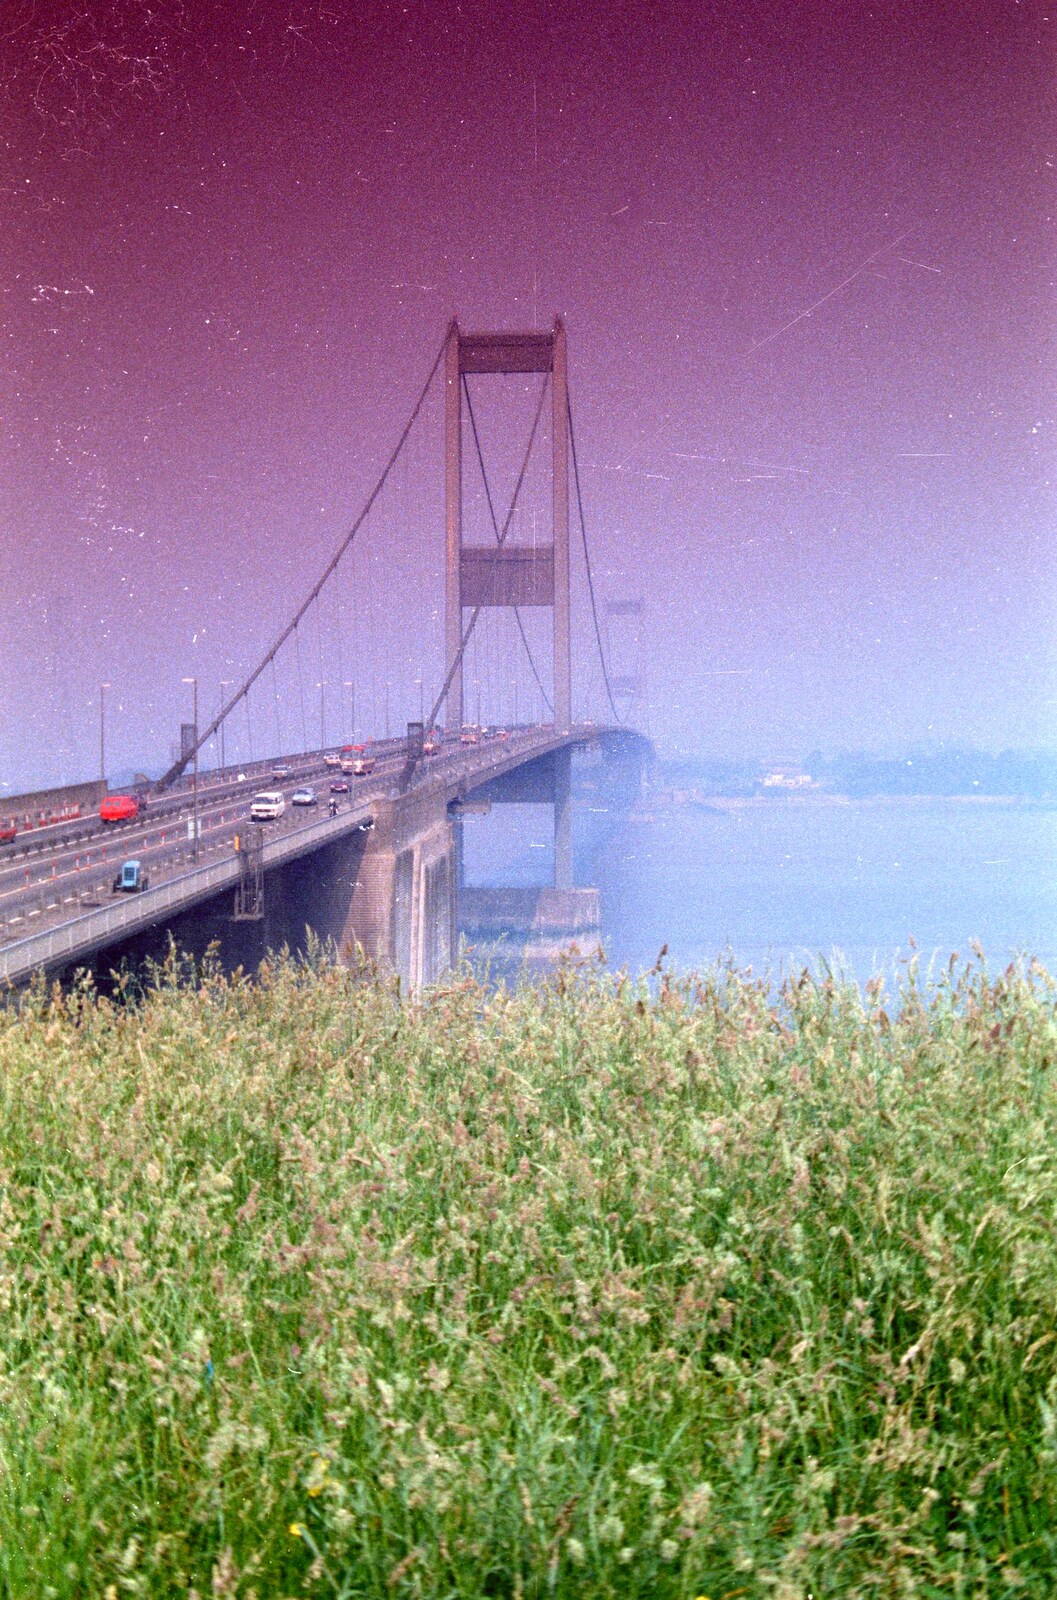 The Severn bridge with a purple graduated filter from A Trip to Chepstow, Monmouthshire, Wales - 5th July 1986